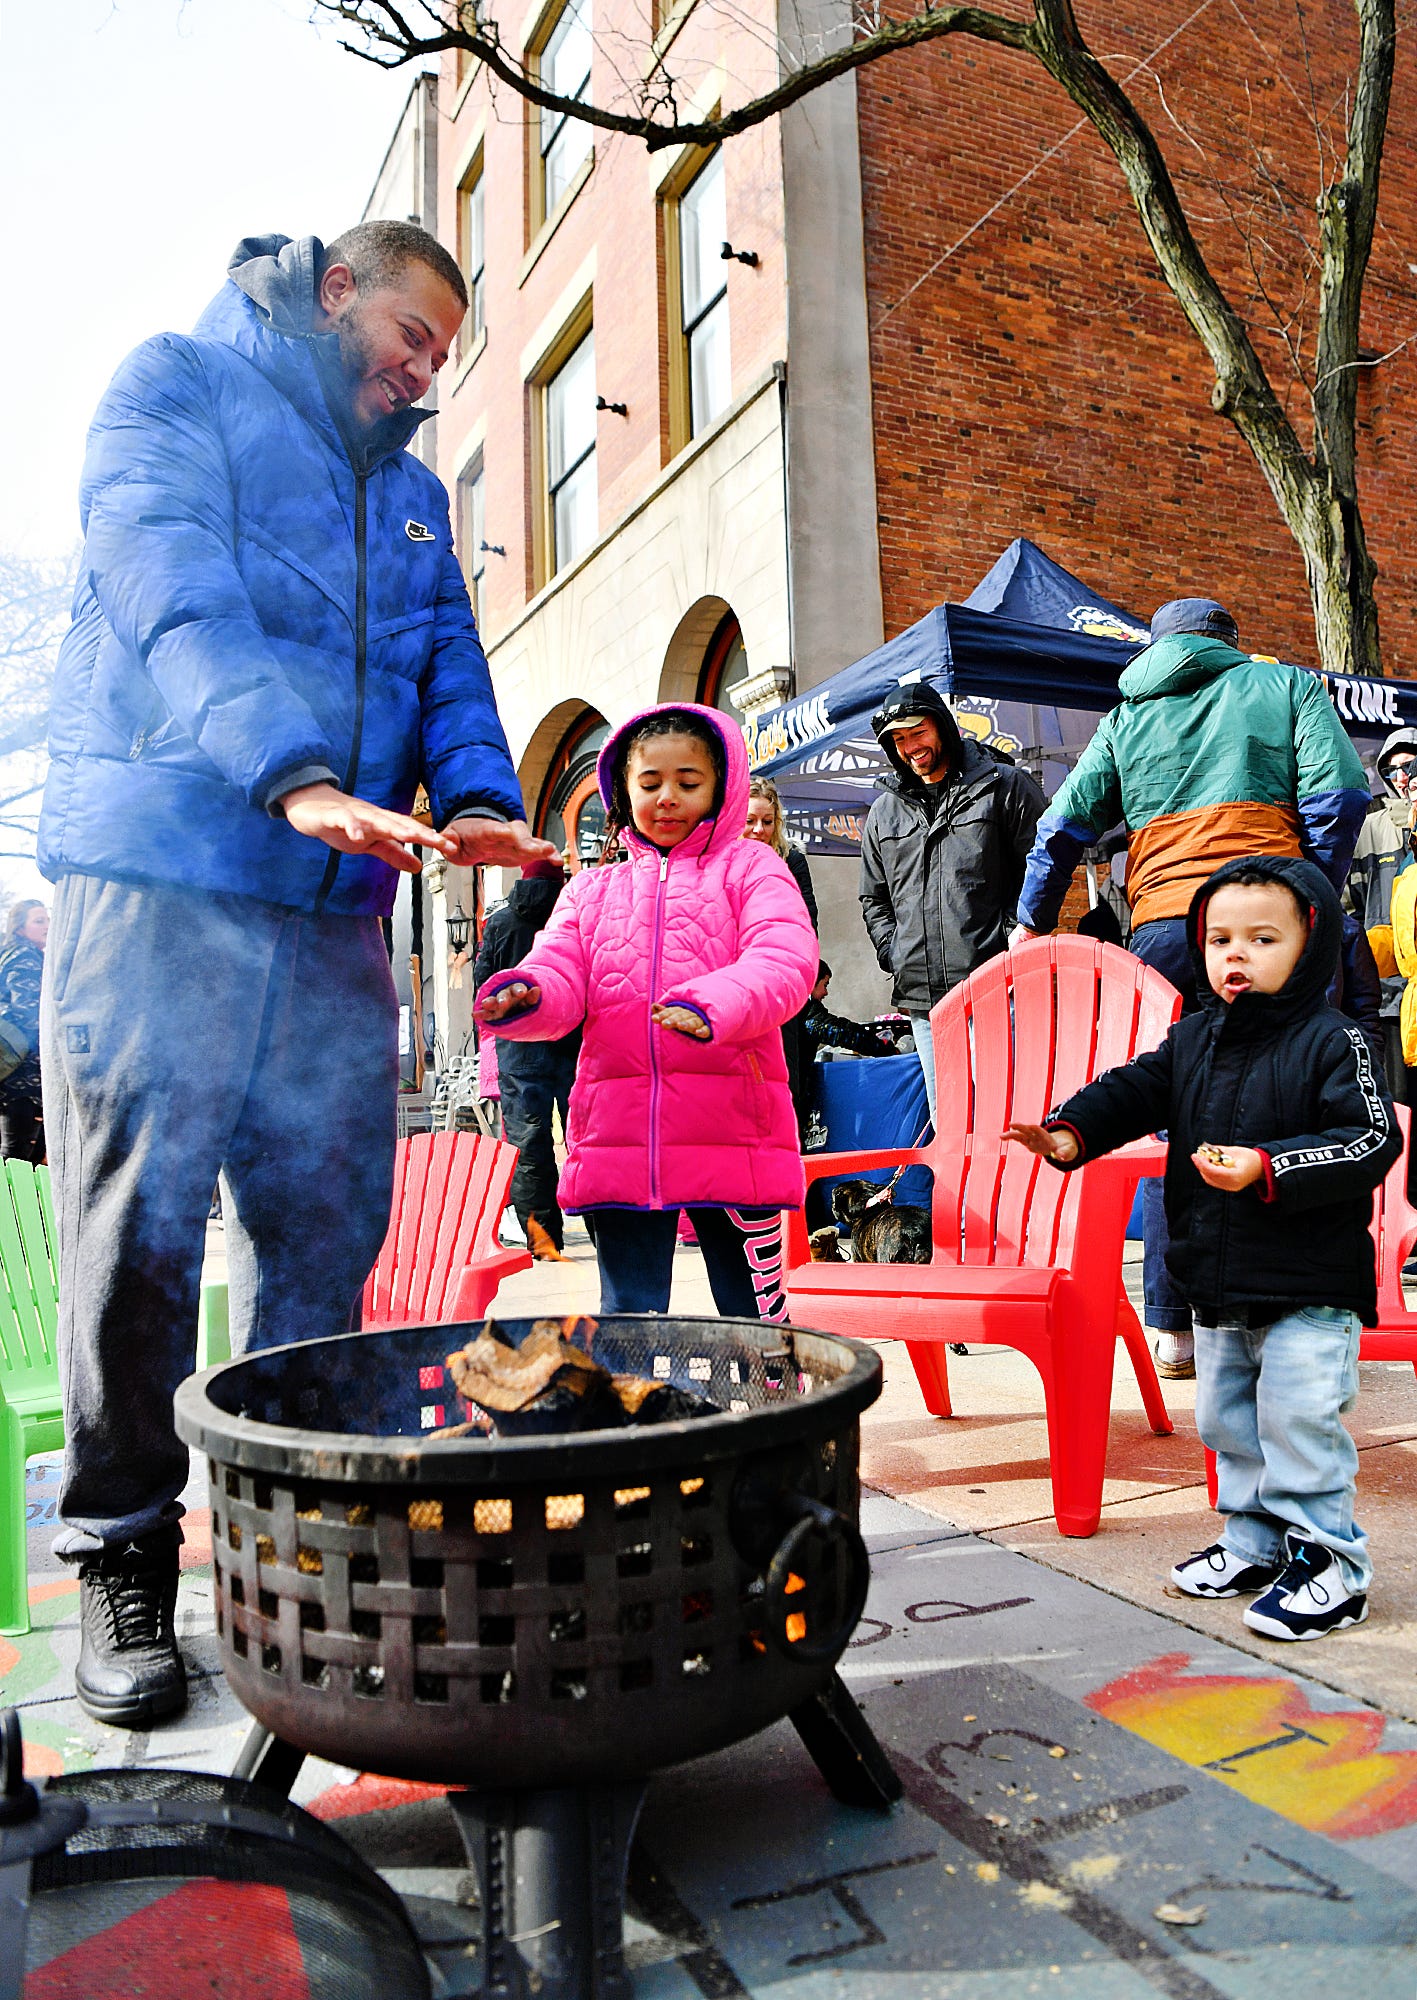 From left, Jeffrey Johnson, of York City, warms his hands near the fire pit with his children Laila Johnson, 6, and Haiden Johnson, 2, during the 8th annual FestivICE event in downtown York City, Saturday, Jan. 15, 2022. Dawn J. Sagert photo